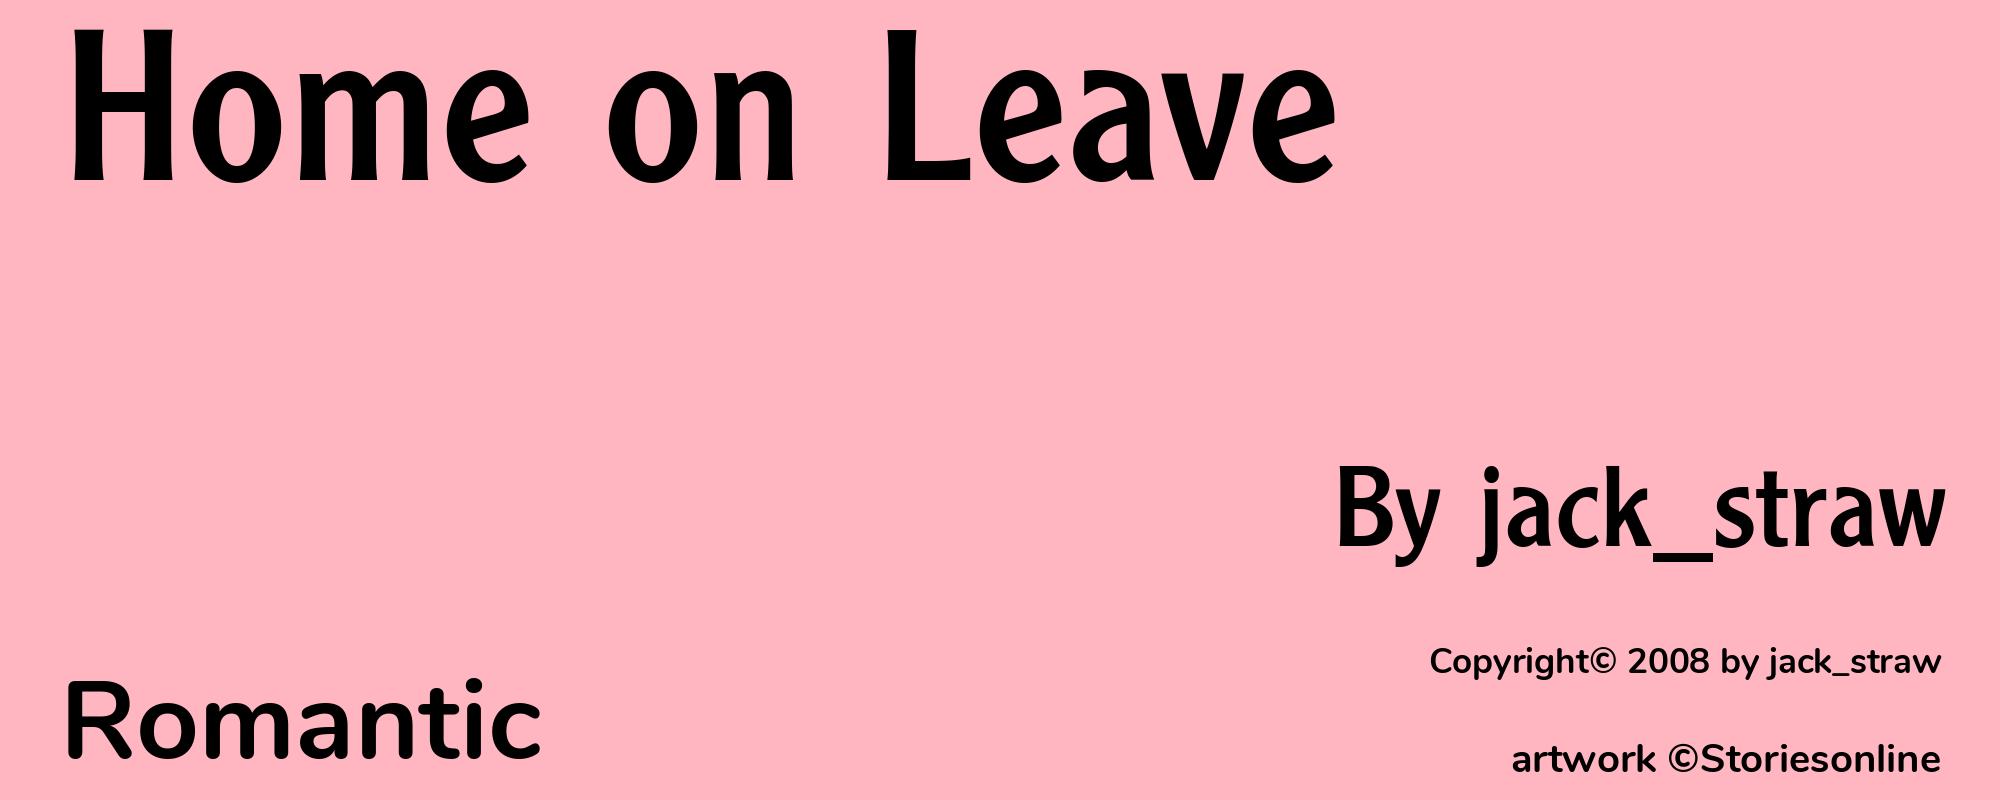 Home on Leave - Cover